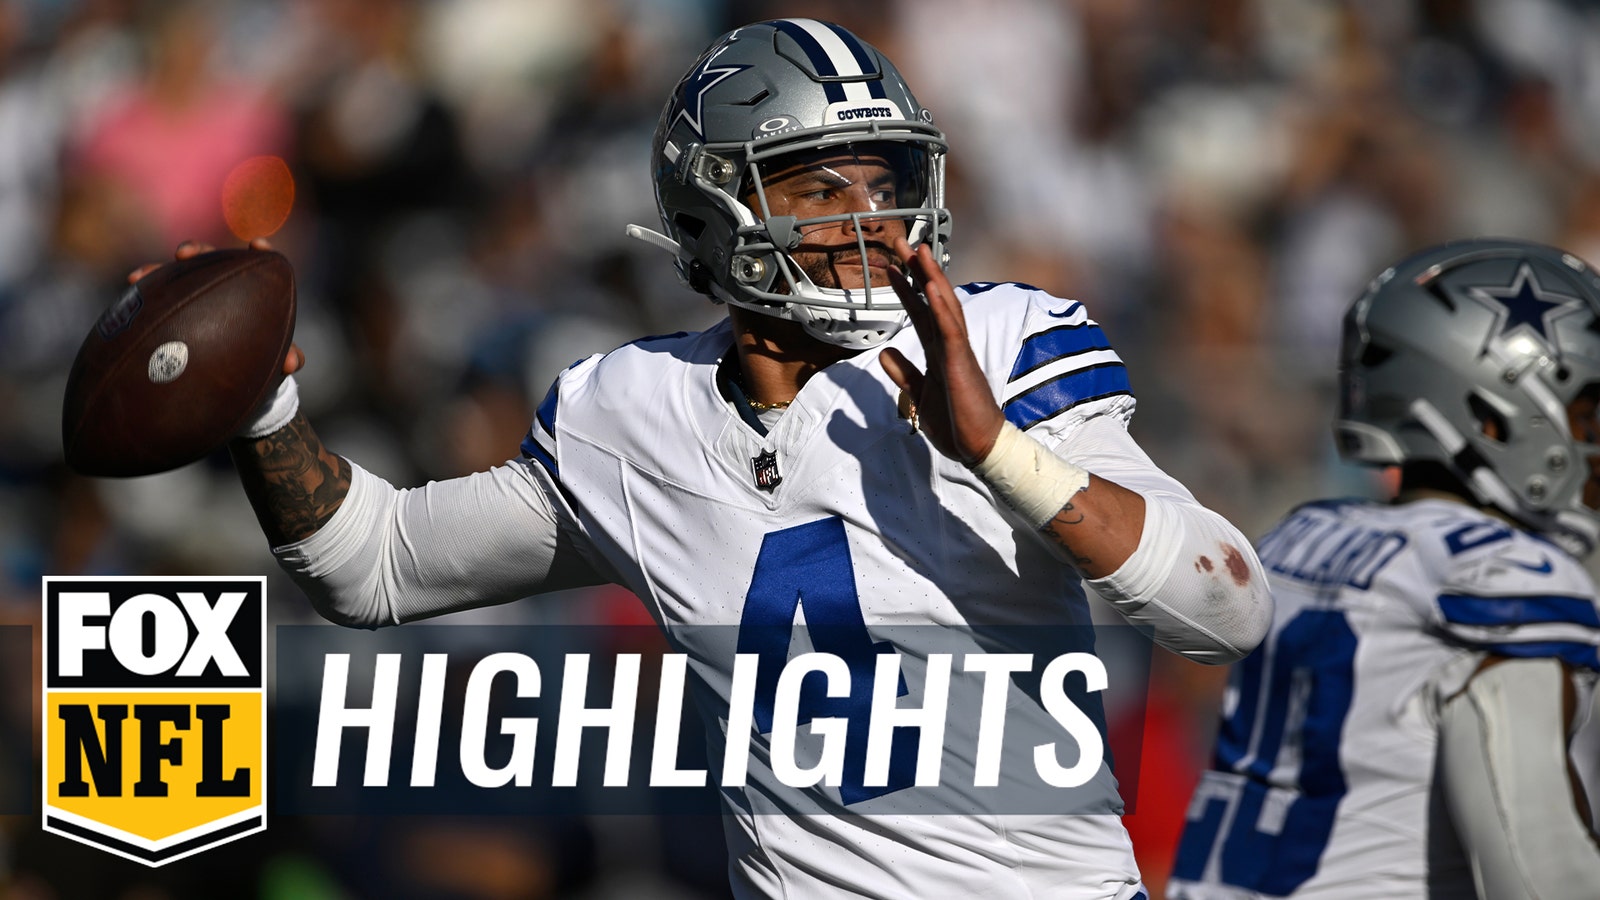 Dak Prescott throws for 189 yards and two TDs in win over Panthers